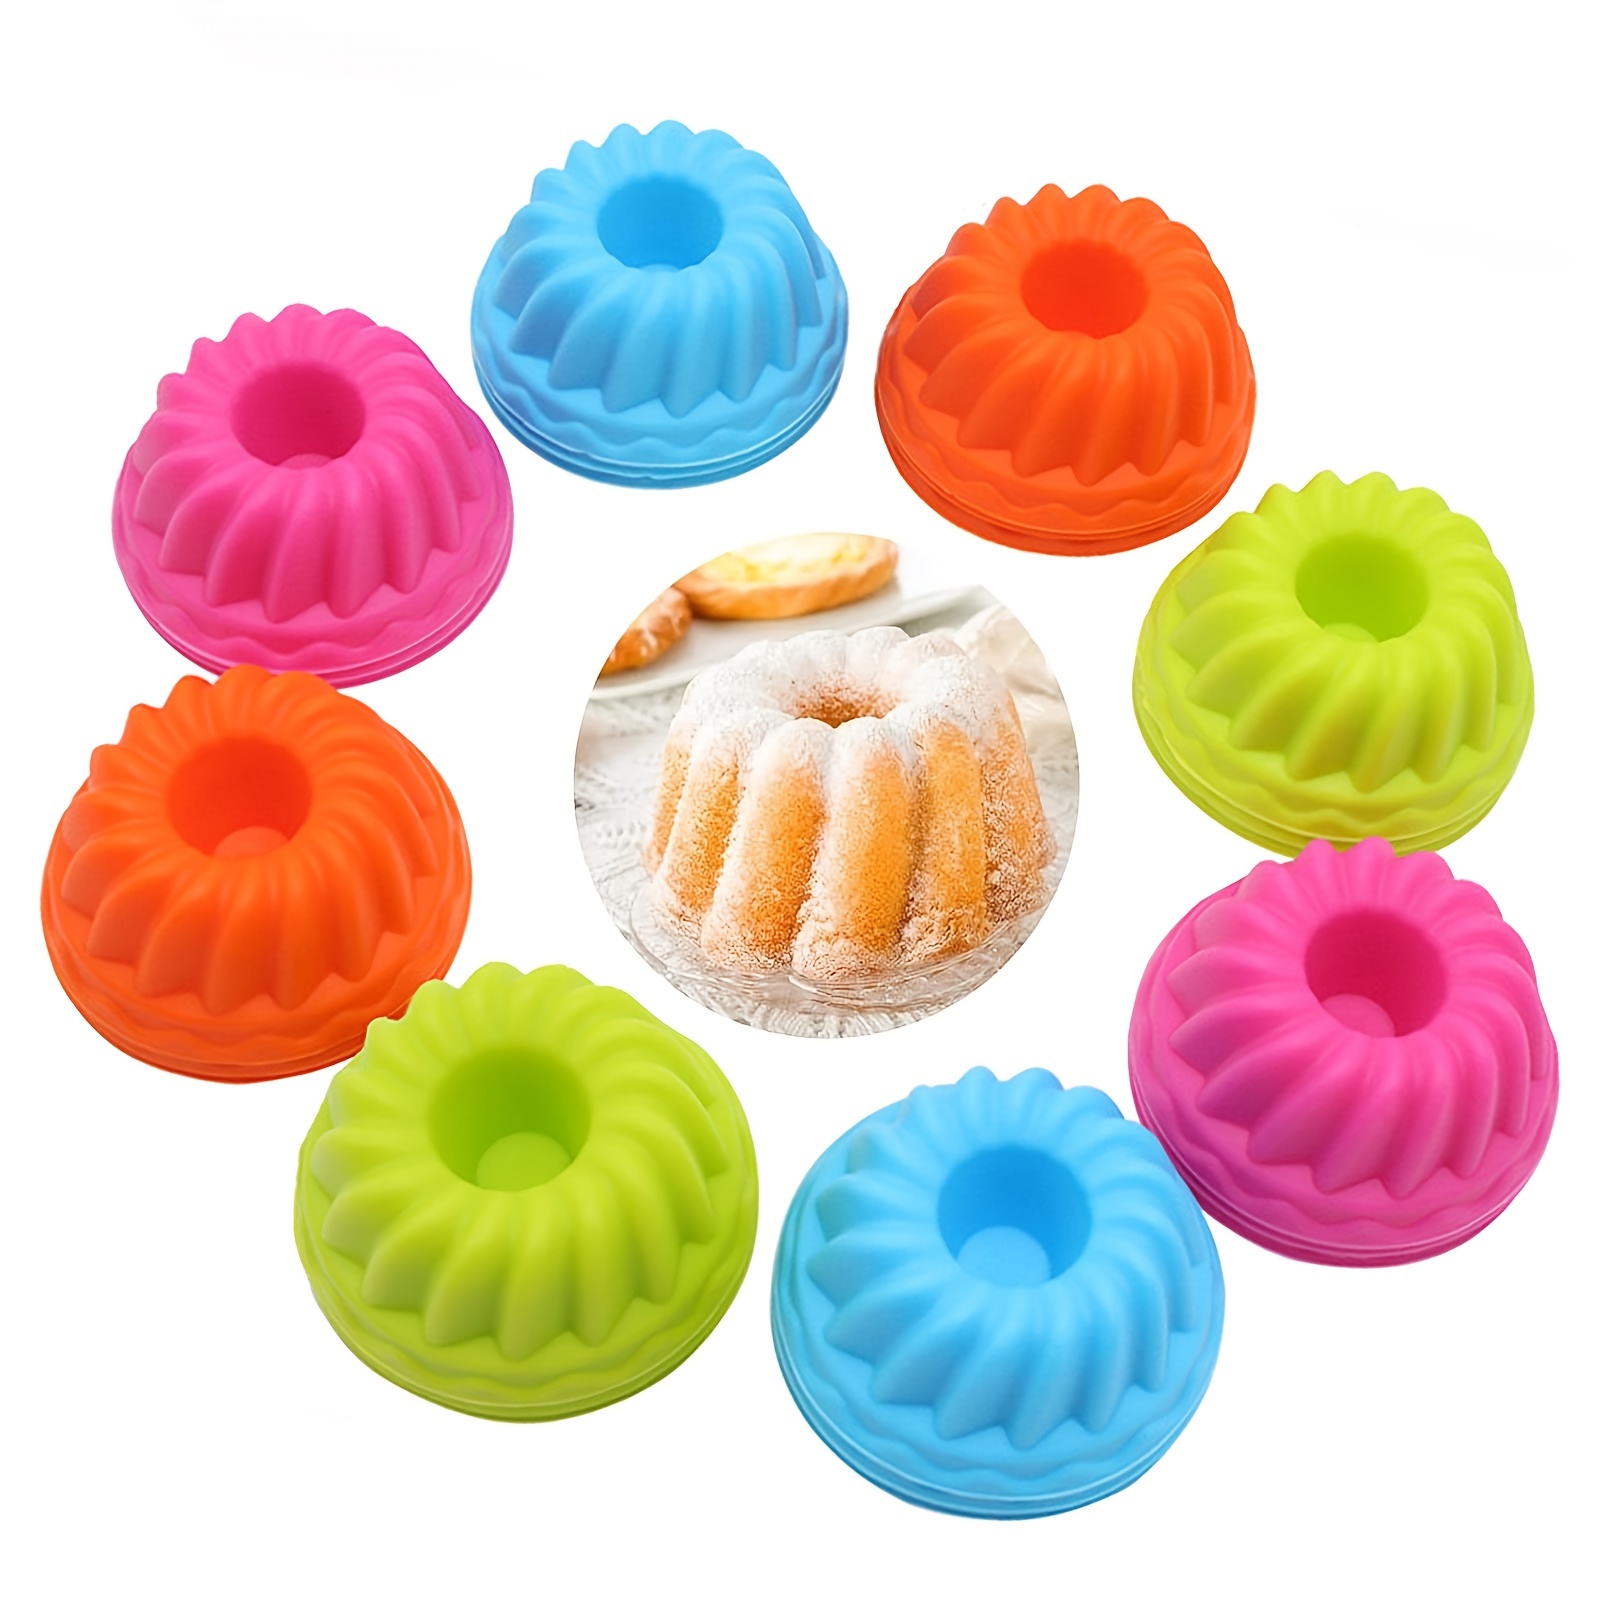 Mini Bundt Pans, Silicone Heritage Bundtlette Cake Mold, For Fluted Tube  Cake Making, Baking Tools, Kitchen Gadgets, Kitchen Accessories,nonstick  Cupcake Liners, Bpa Free Fancy Dessert Trays - Perfect For Jelly & Muffins!  